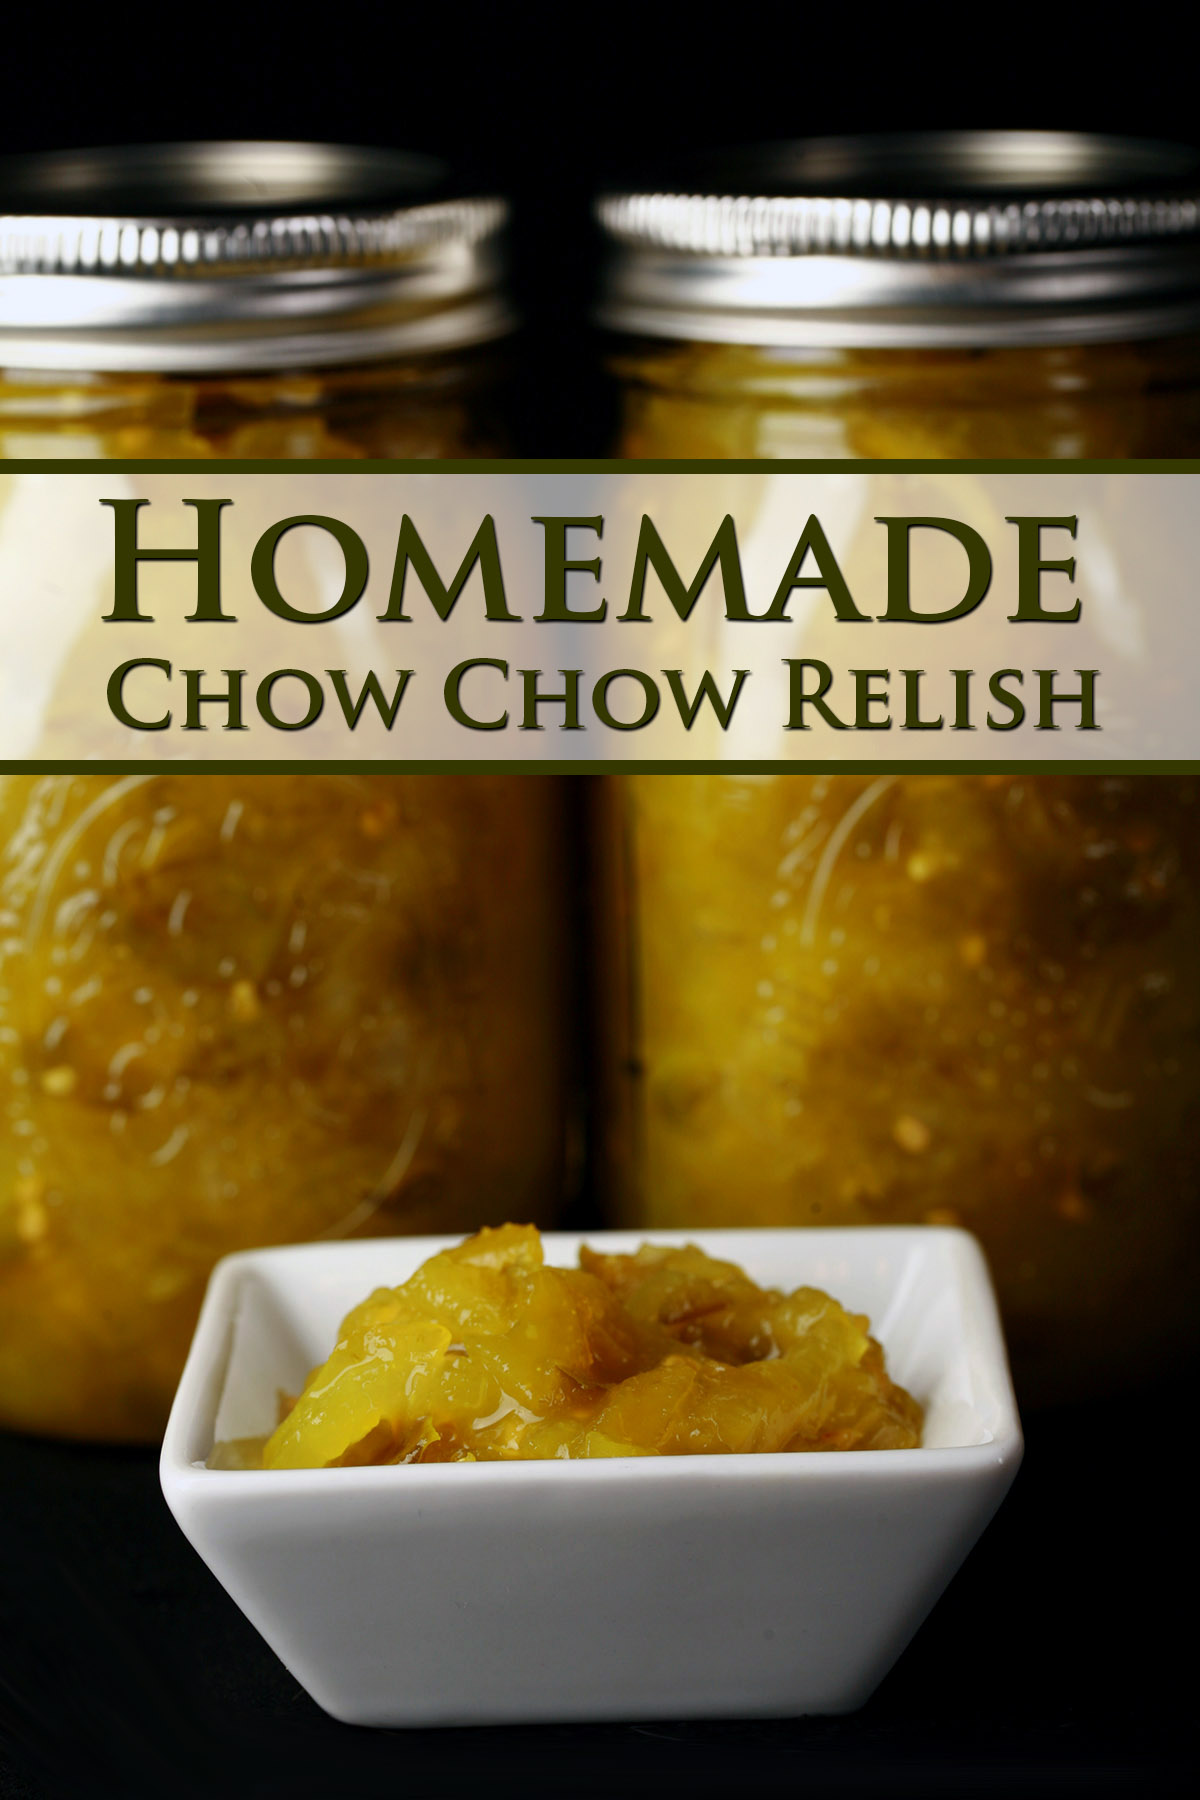 Two jars of chow chow relish, with a little square bowl of the relish in front of them. Green text says homemade chow chow relish.